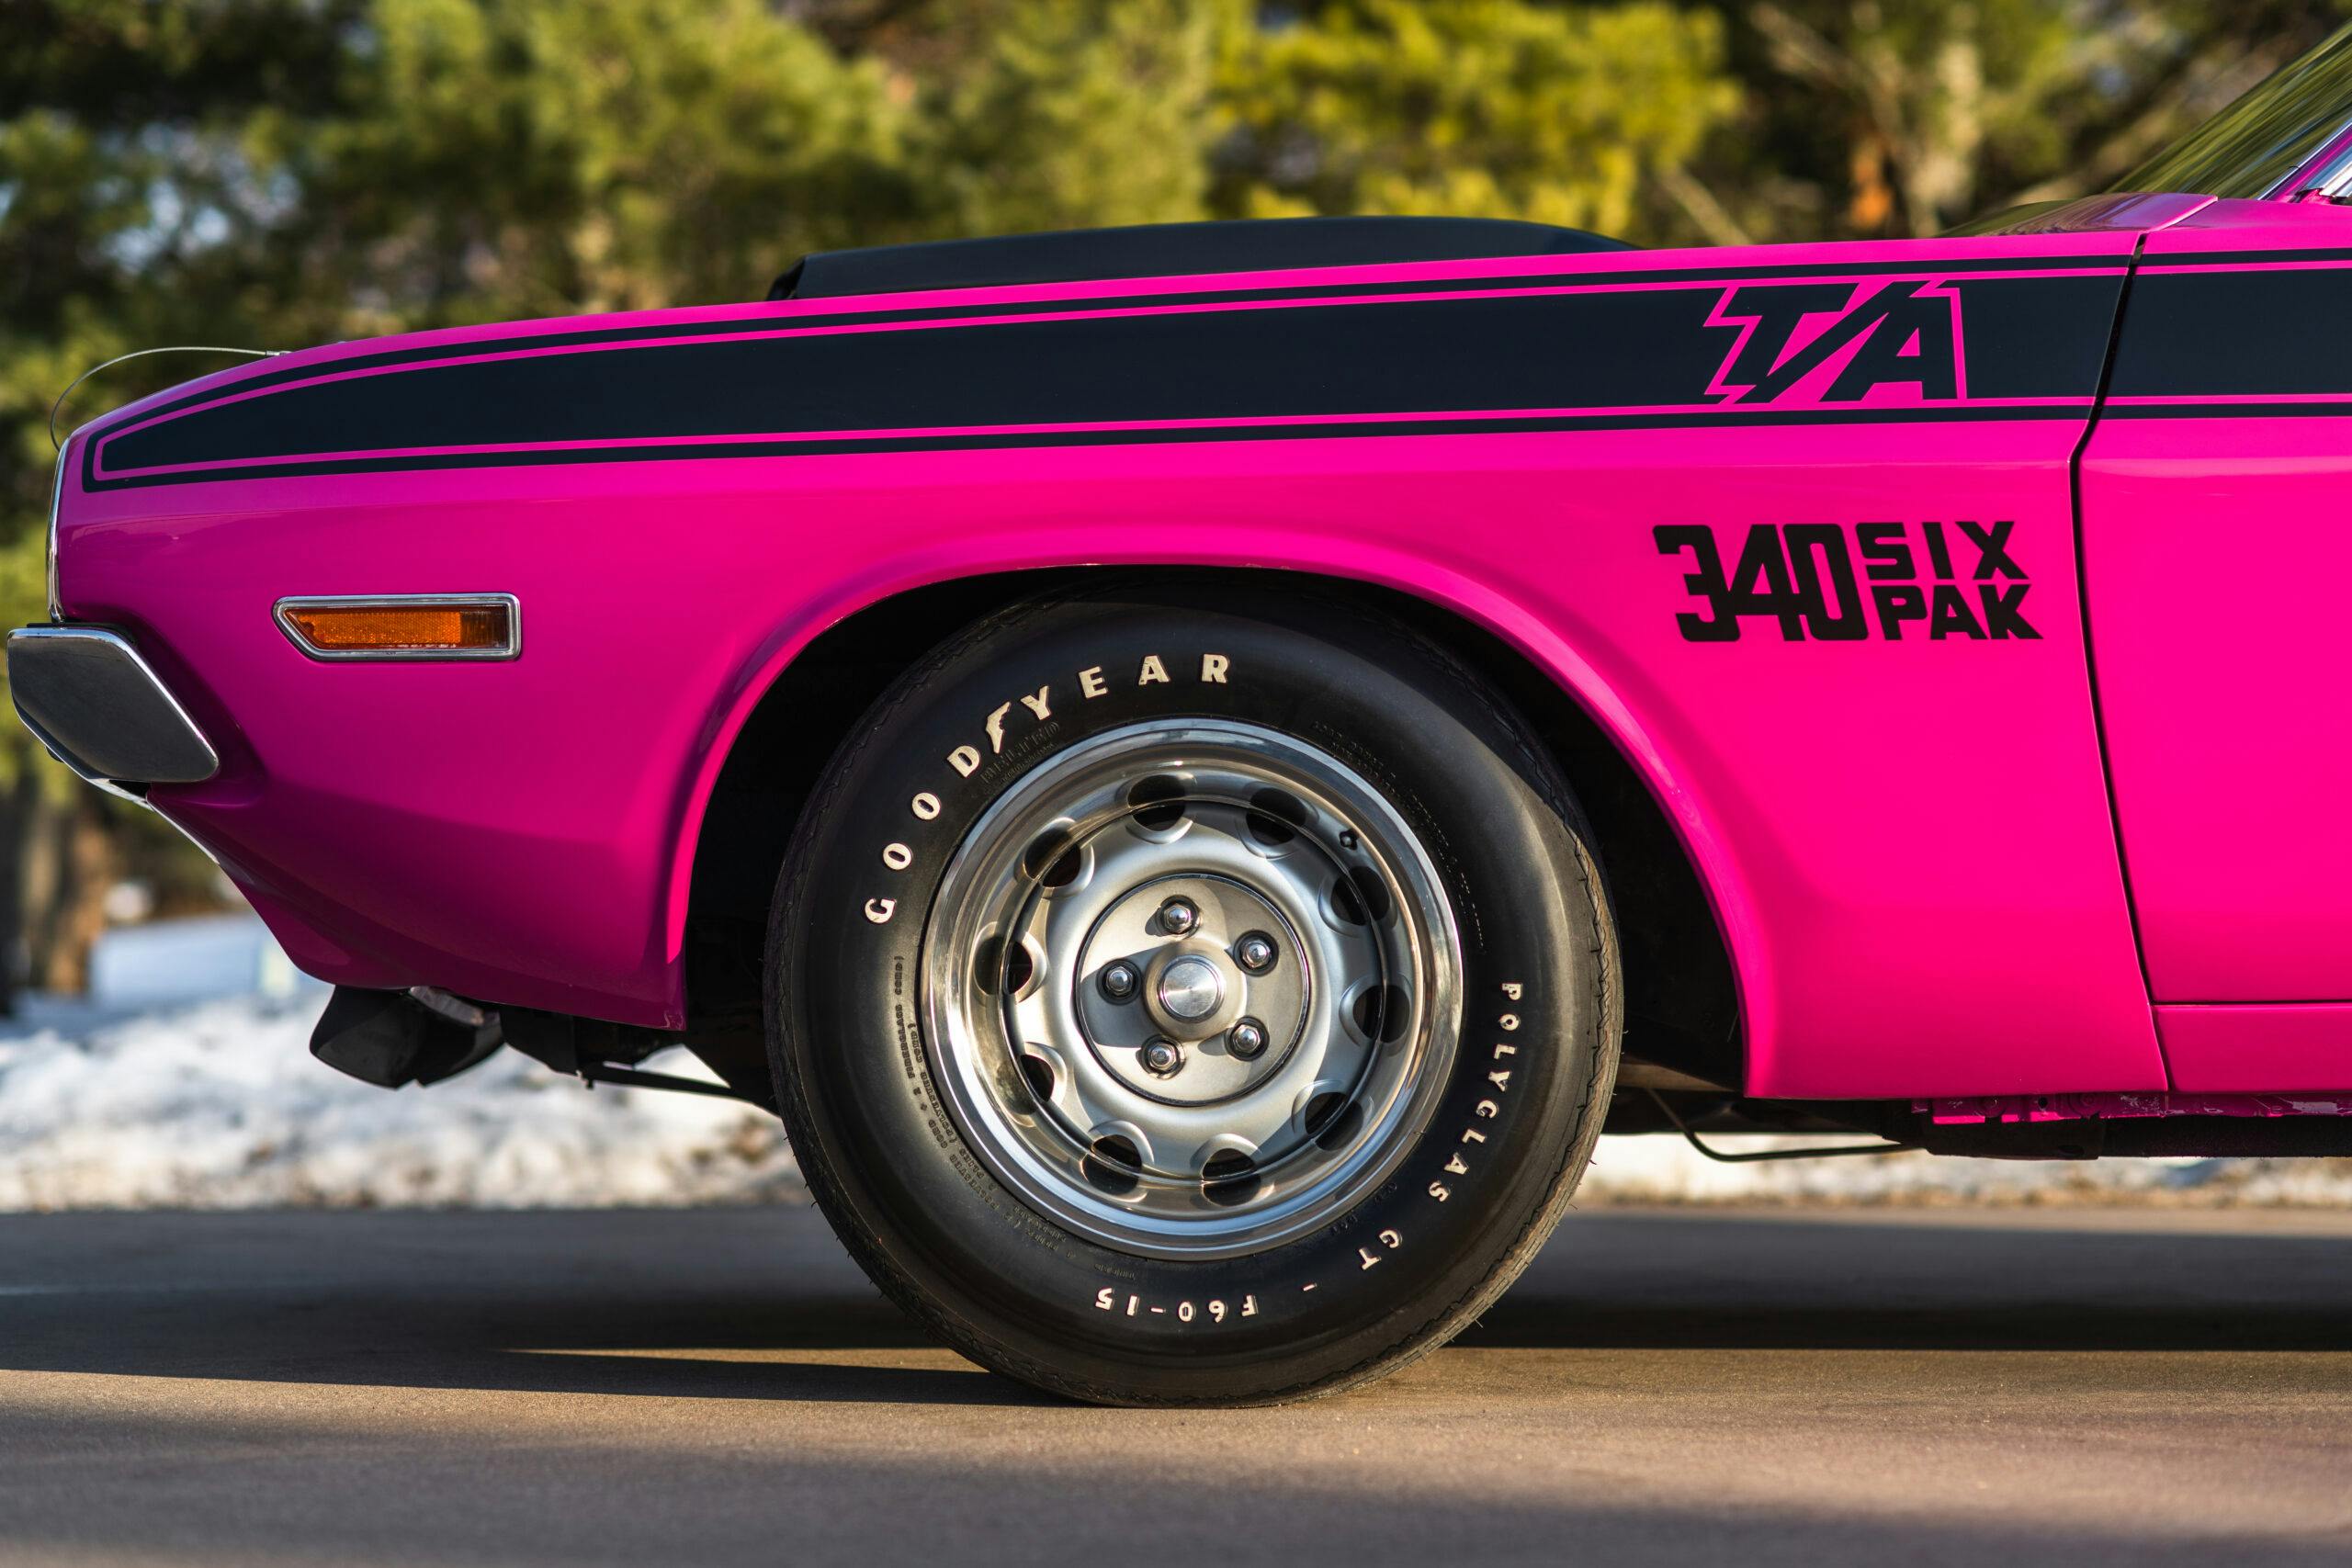 High-impact colors: When hot muscle cars got some crazy paint